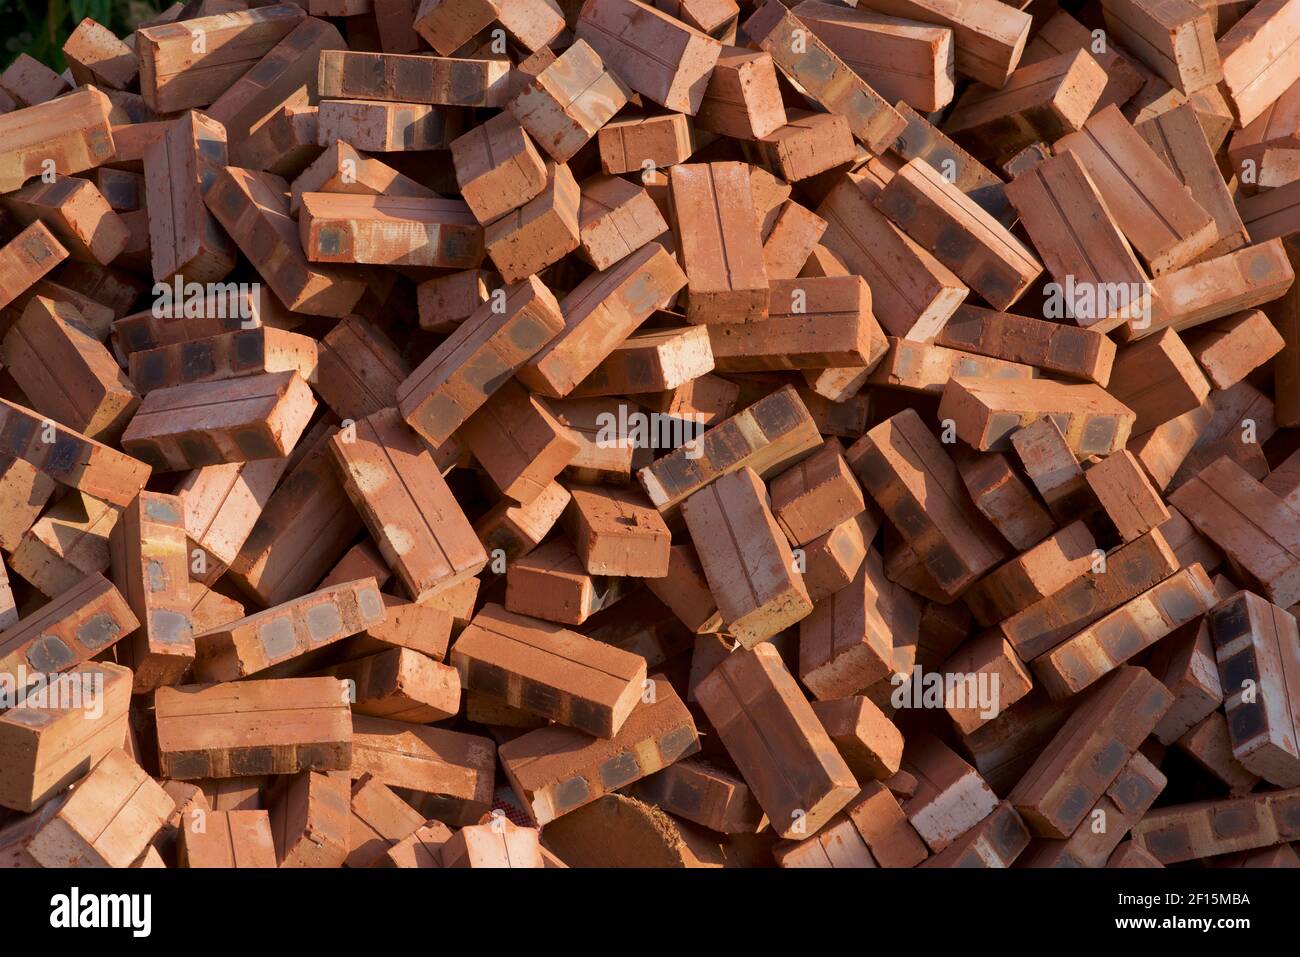 Haphazard pile of Bricks. Building materials used in construction. Rectangles Stock Photo